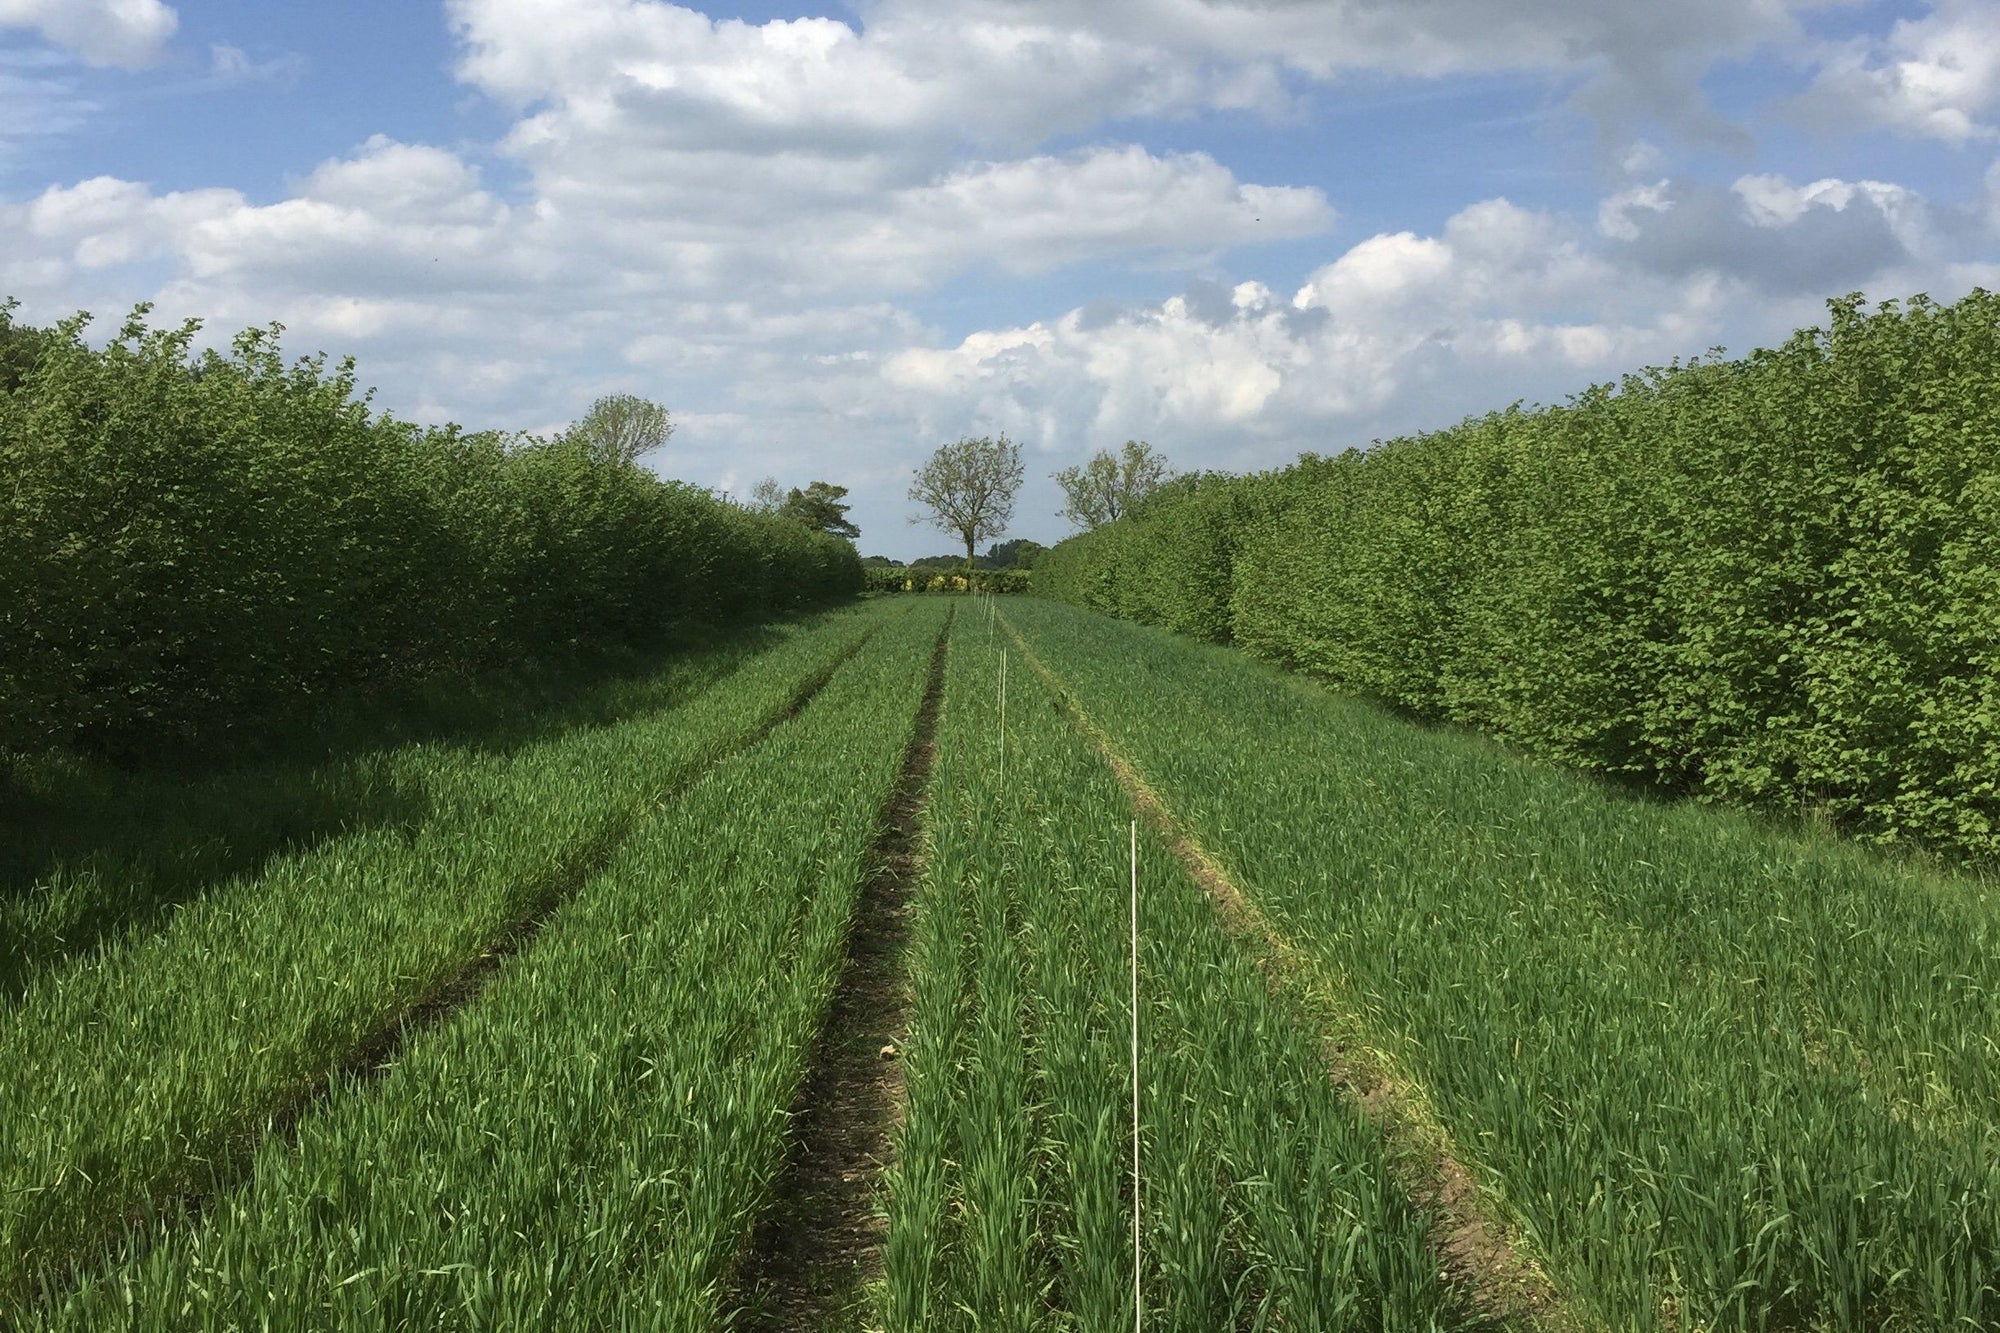 East Anglian Agroforestry Open Farm Weekend (1st & 2nd May)